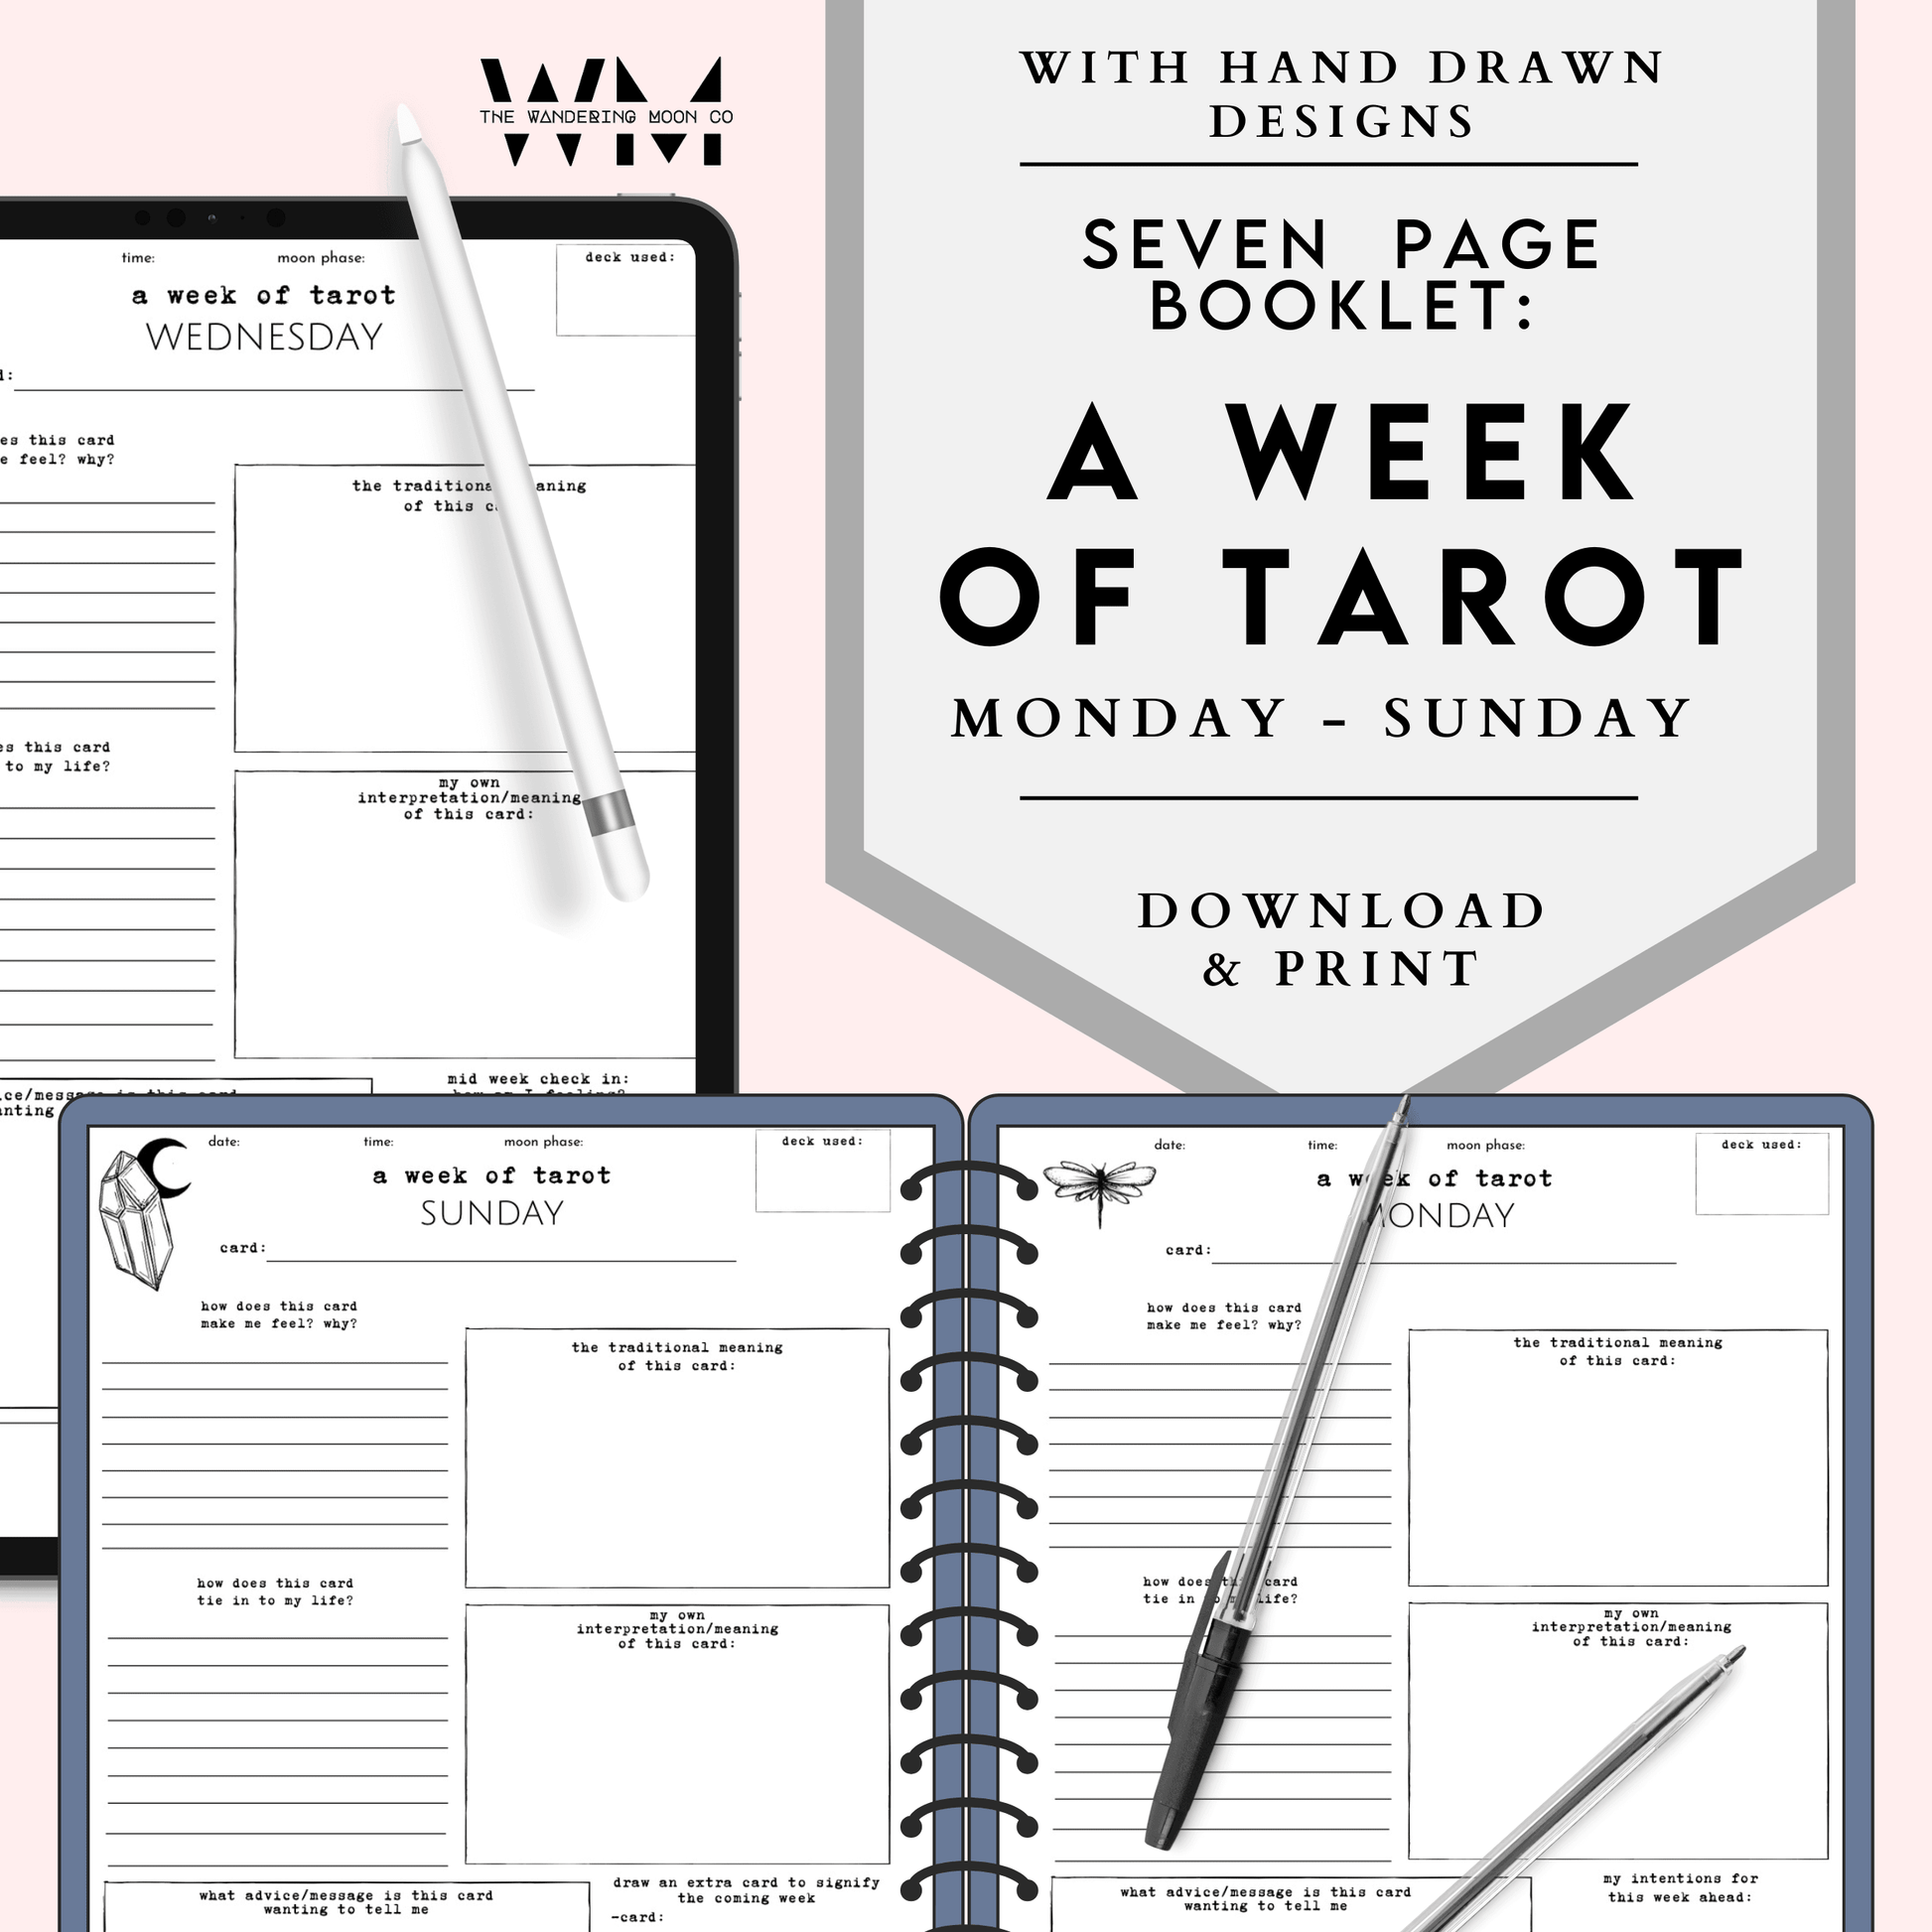 showing pages in black & white from the week of tarot journal